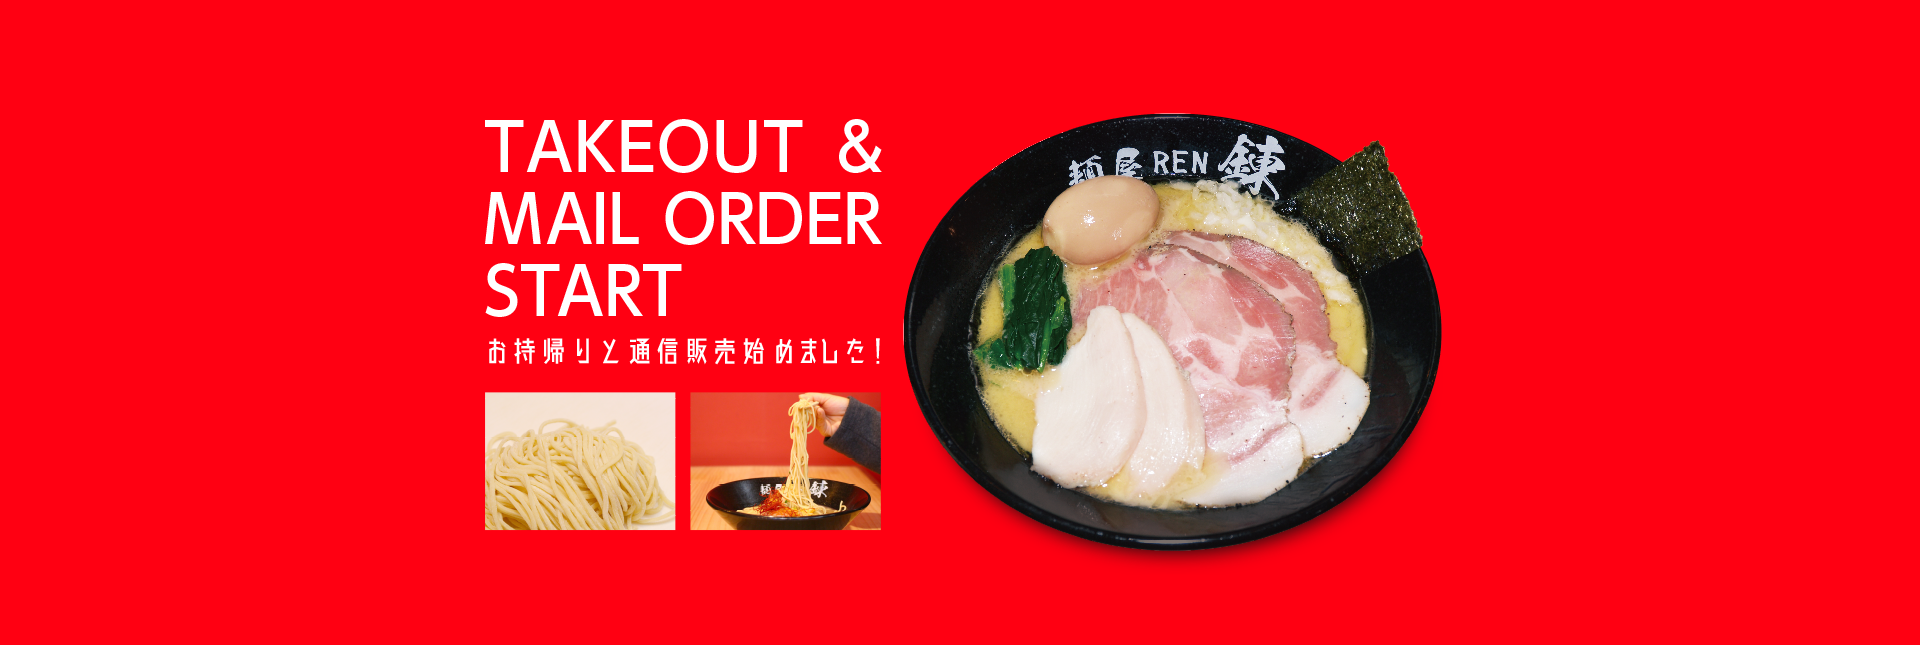 TAKEOUT & MAIL ORDER START